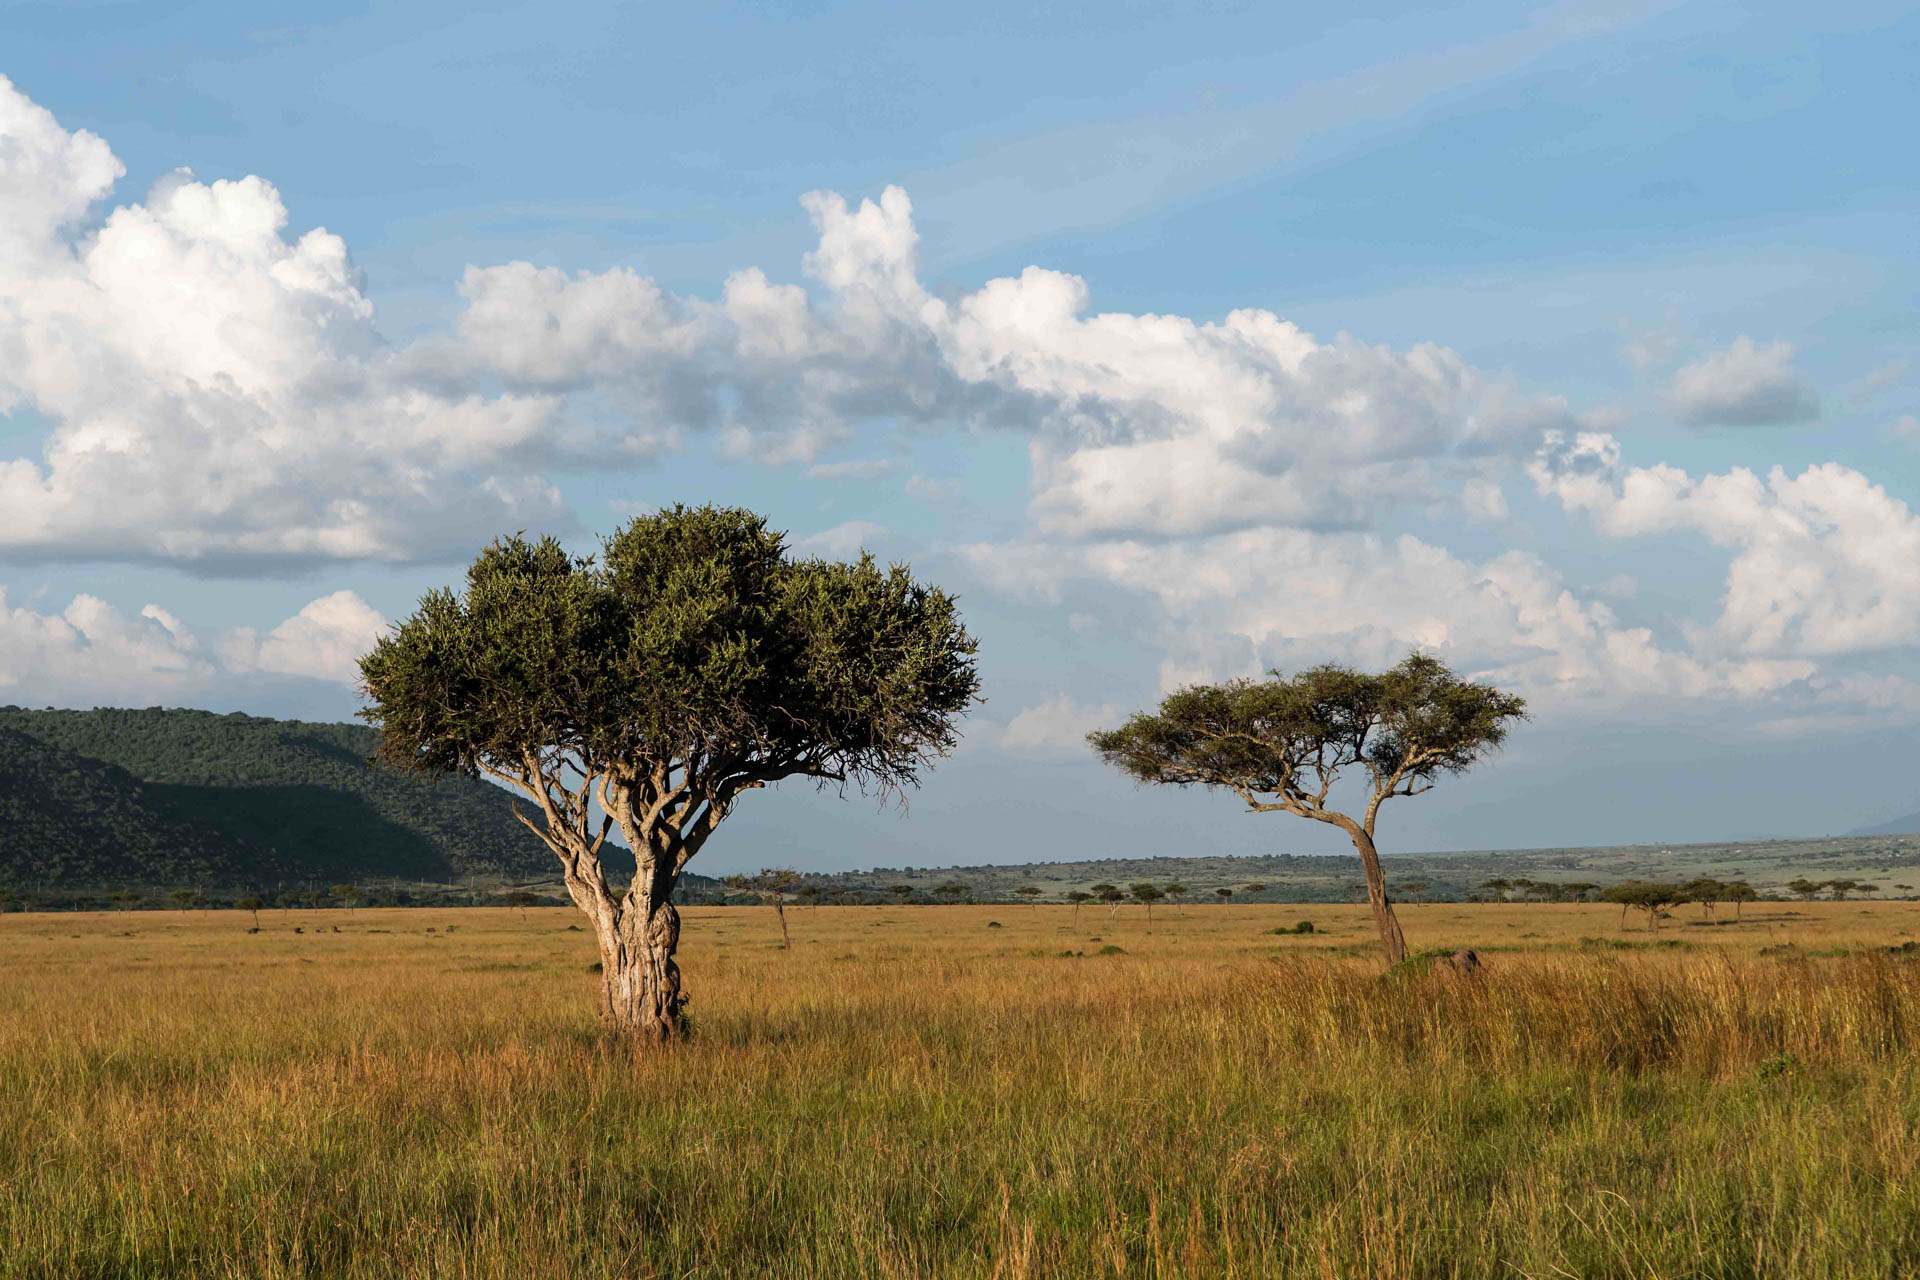 The rolling grassy plains of the Mara Triangle, with the Oloololo Escarpment on the left